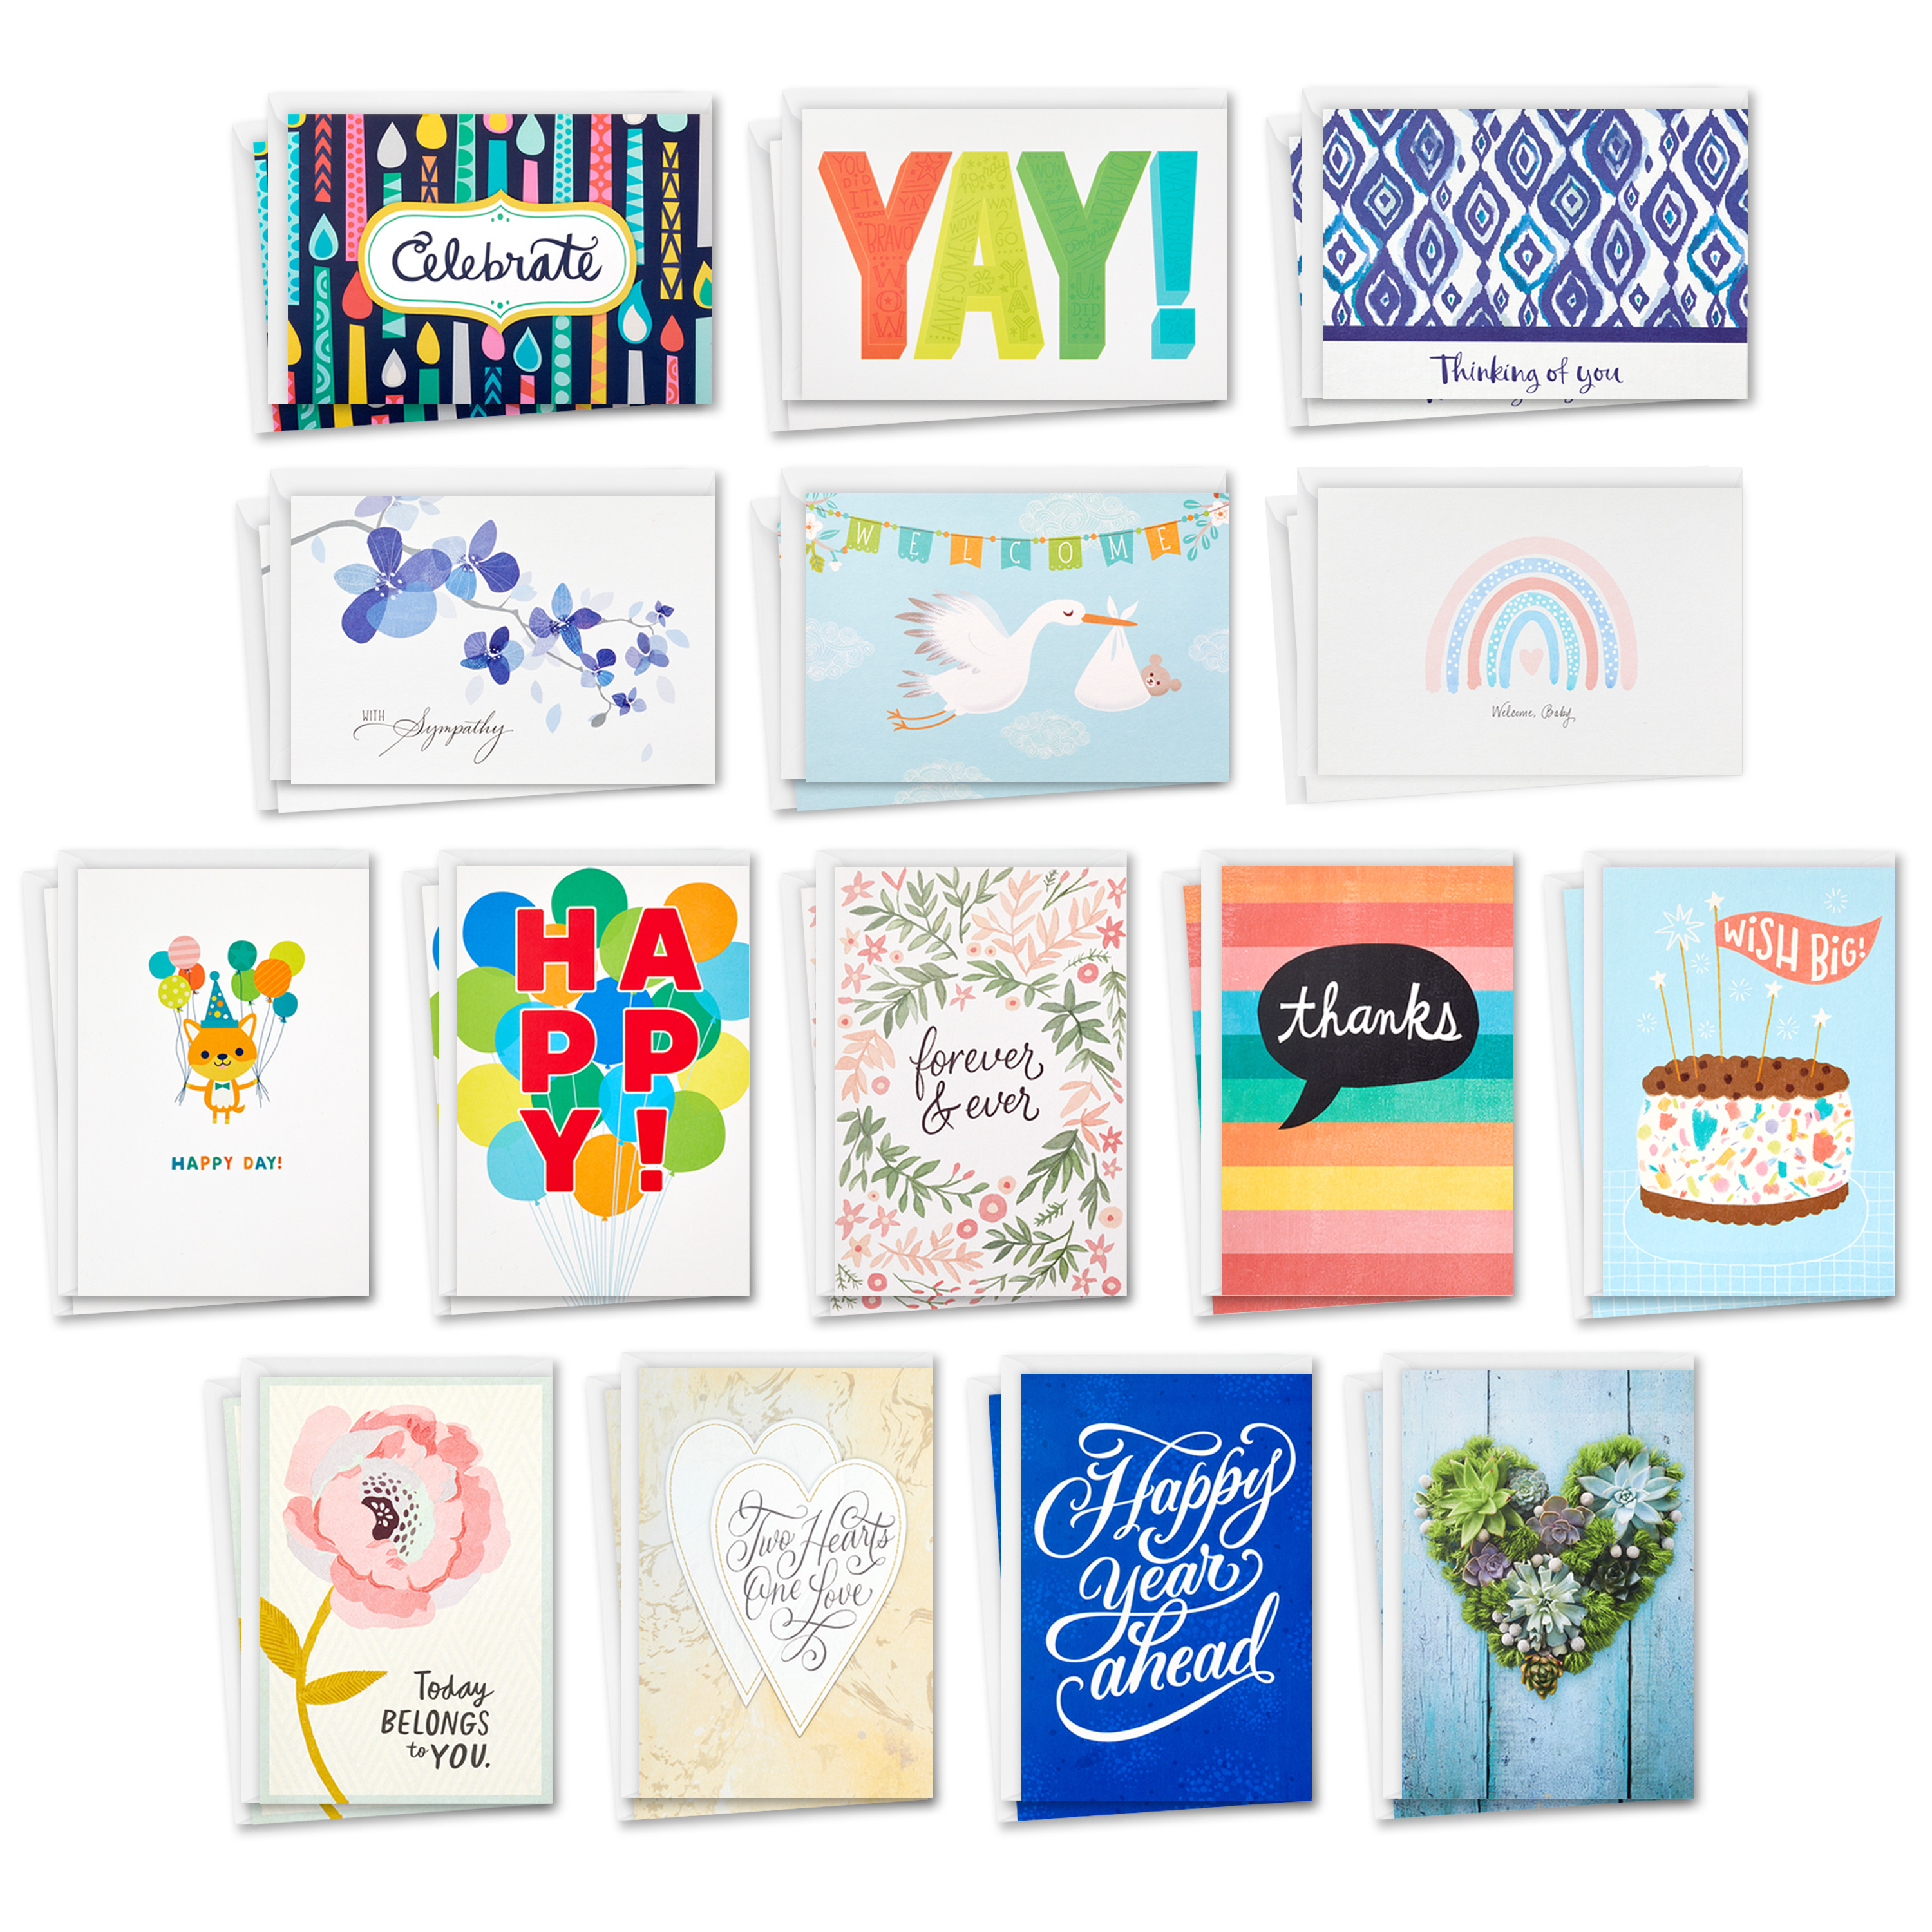 Hallmark All Occasion Greeting Cards Assortment—30 Cards and Envelopes with Card Organizer Box (Blue Leaves)—Birthday Cards, Baby Shower Cards, Sympathy Cards, Wedding Cards, Thank You Cards - image 2 of 5